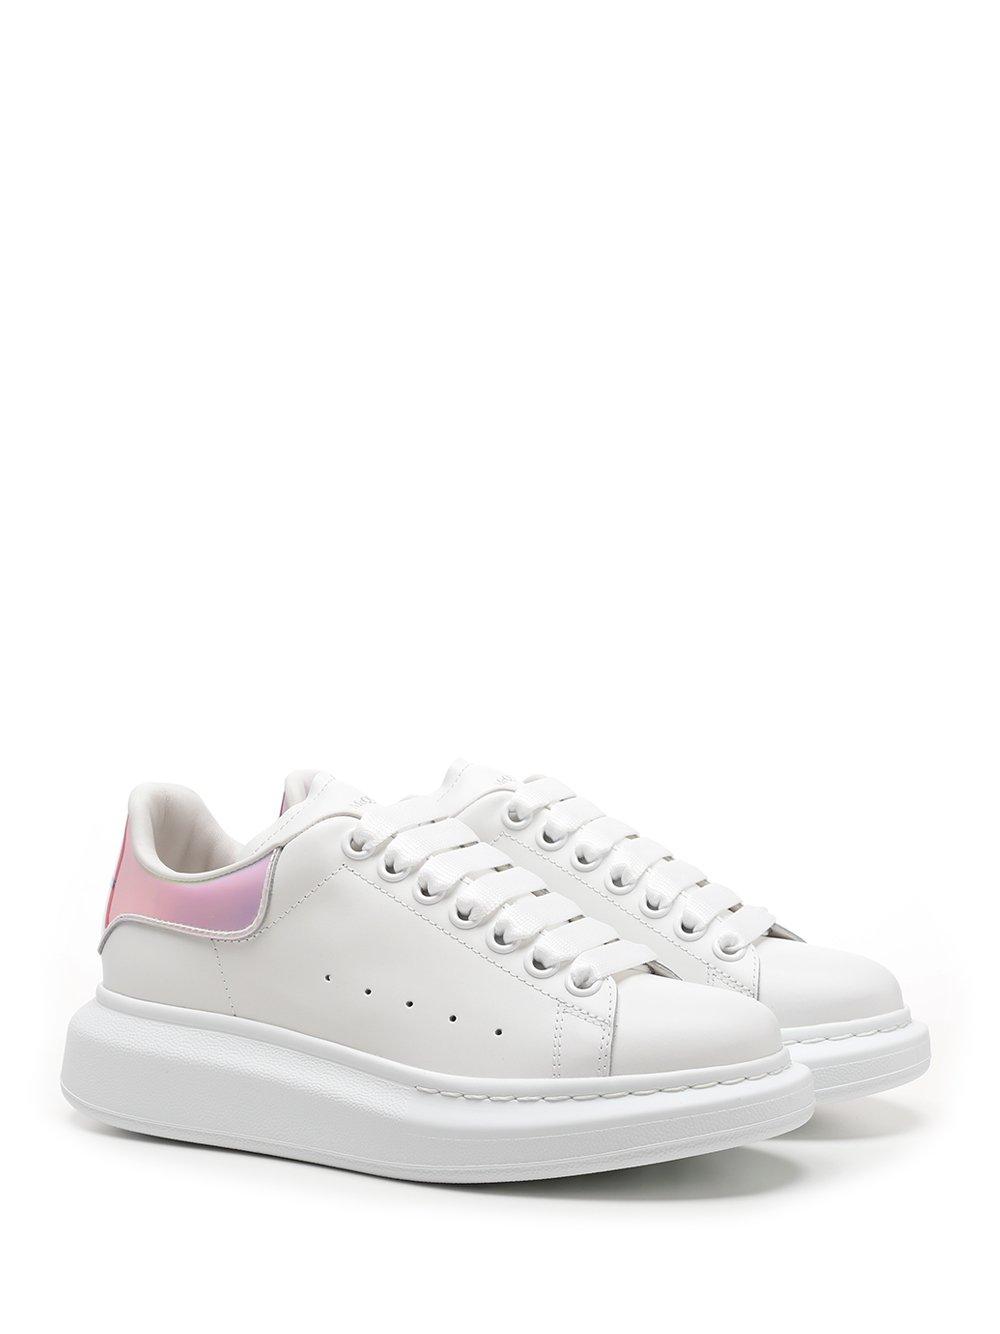 Alexander McQueen Leather Hologram Panelled Oversized Sneakers in White ...